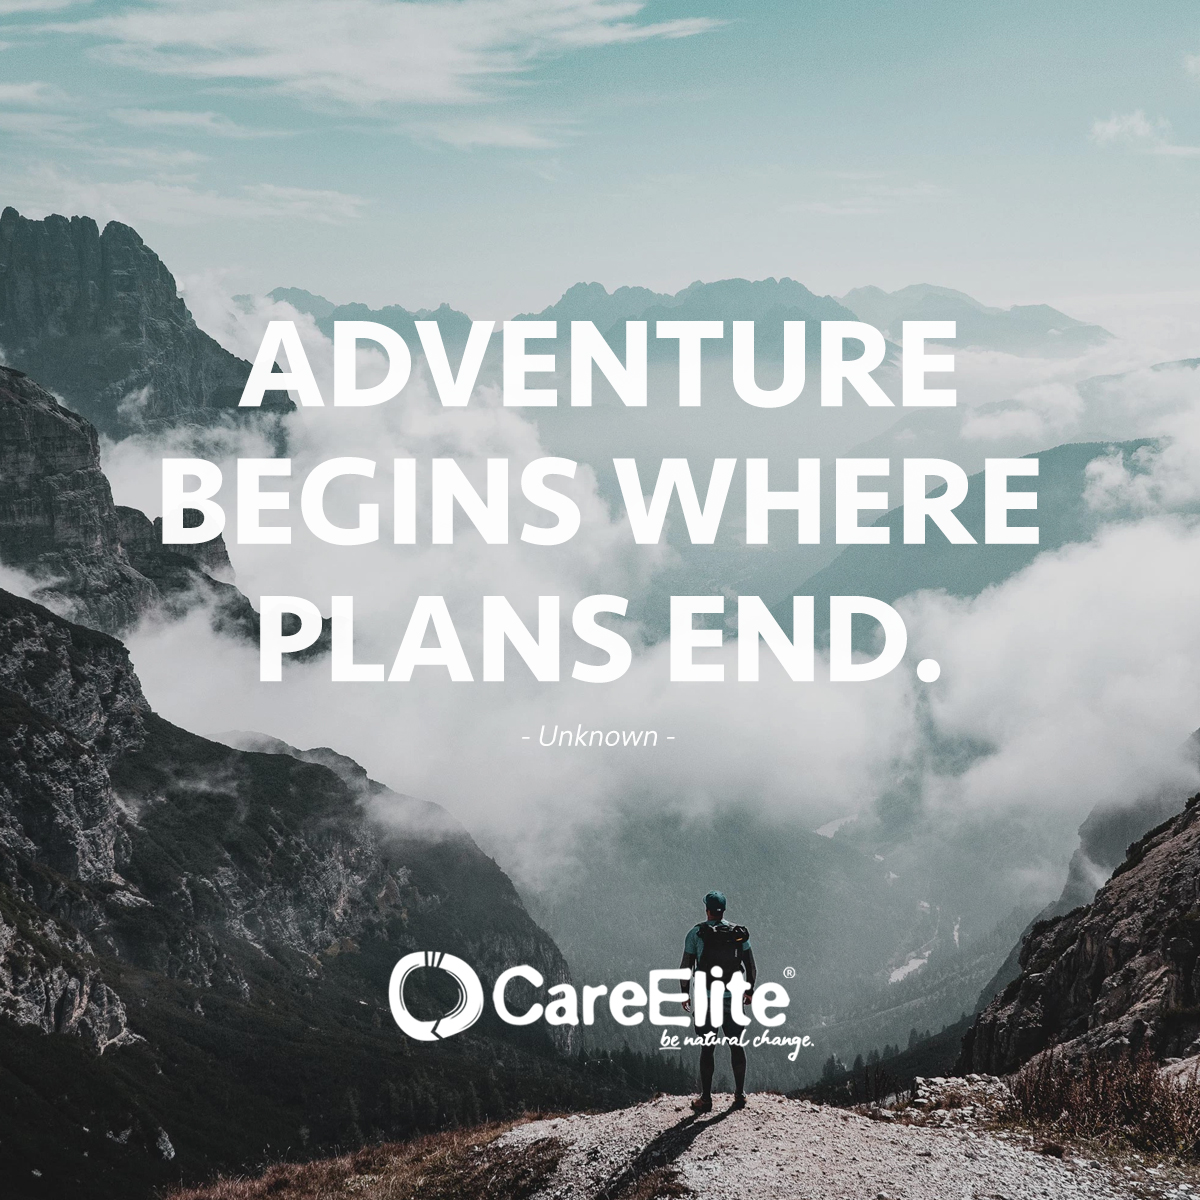 "Adventure begins where plans end." (Quote by Unknown)